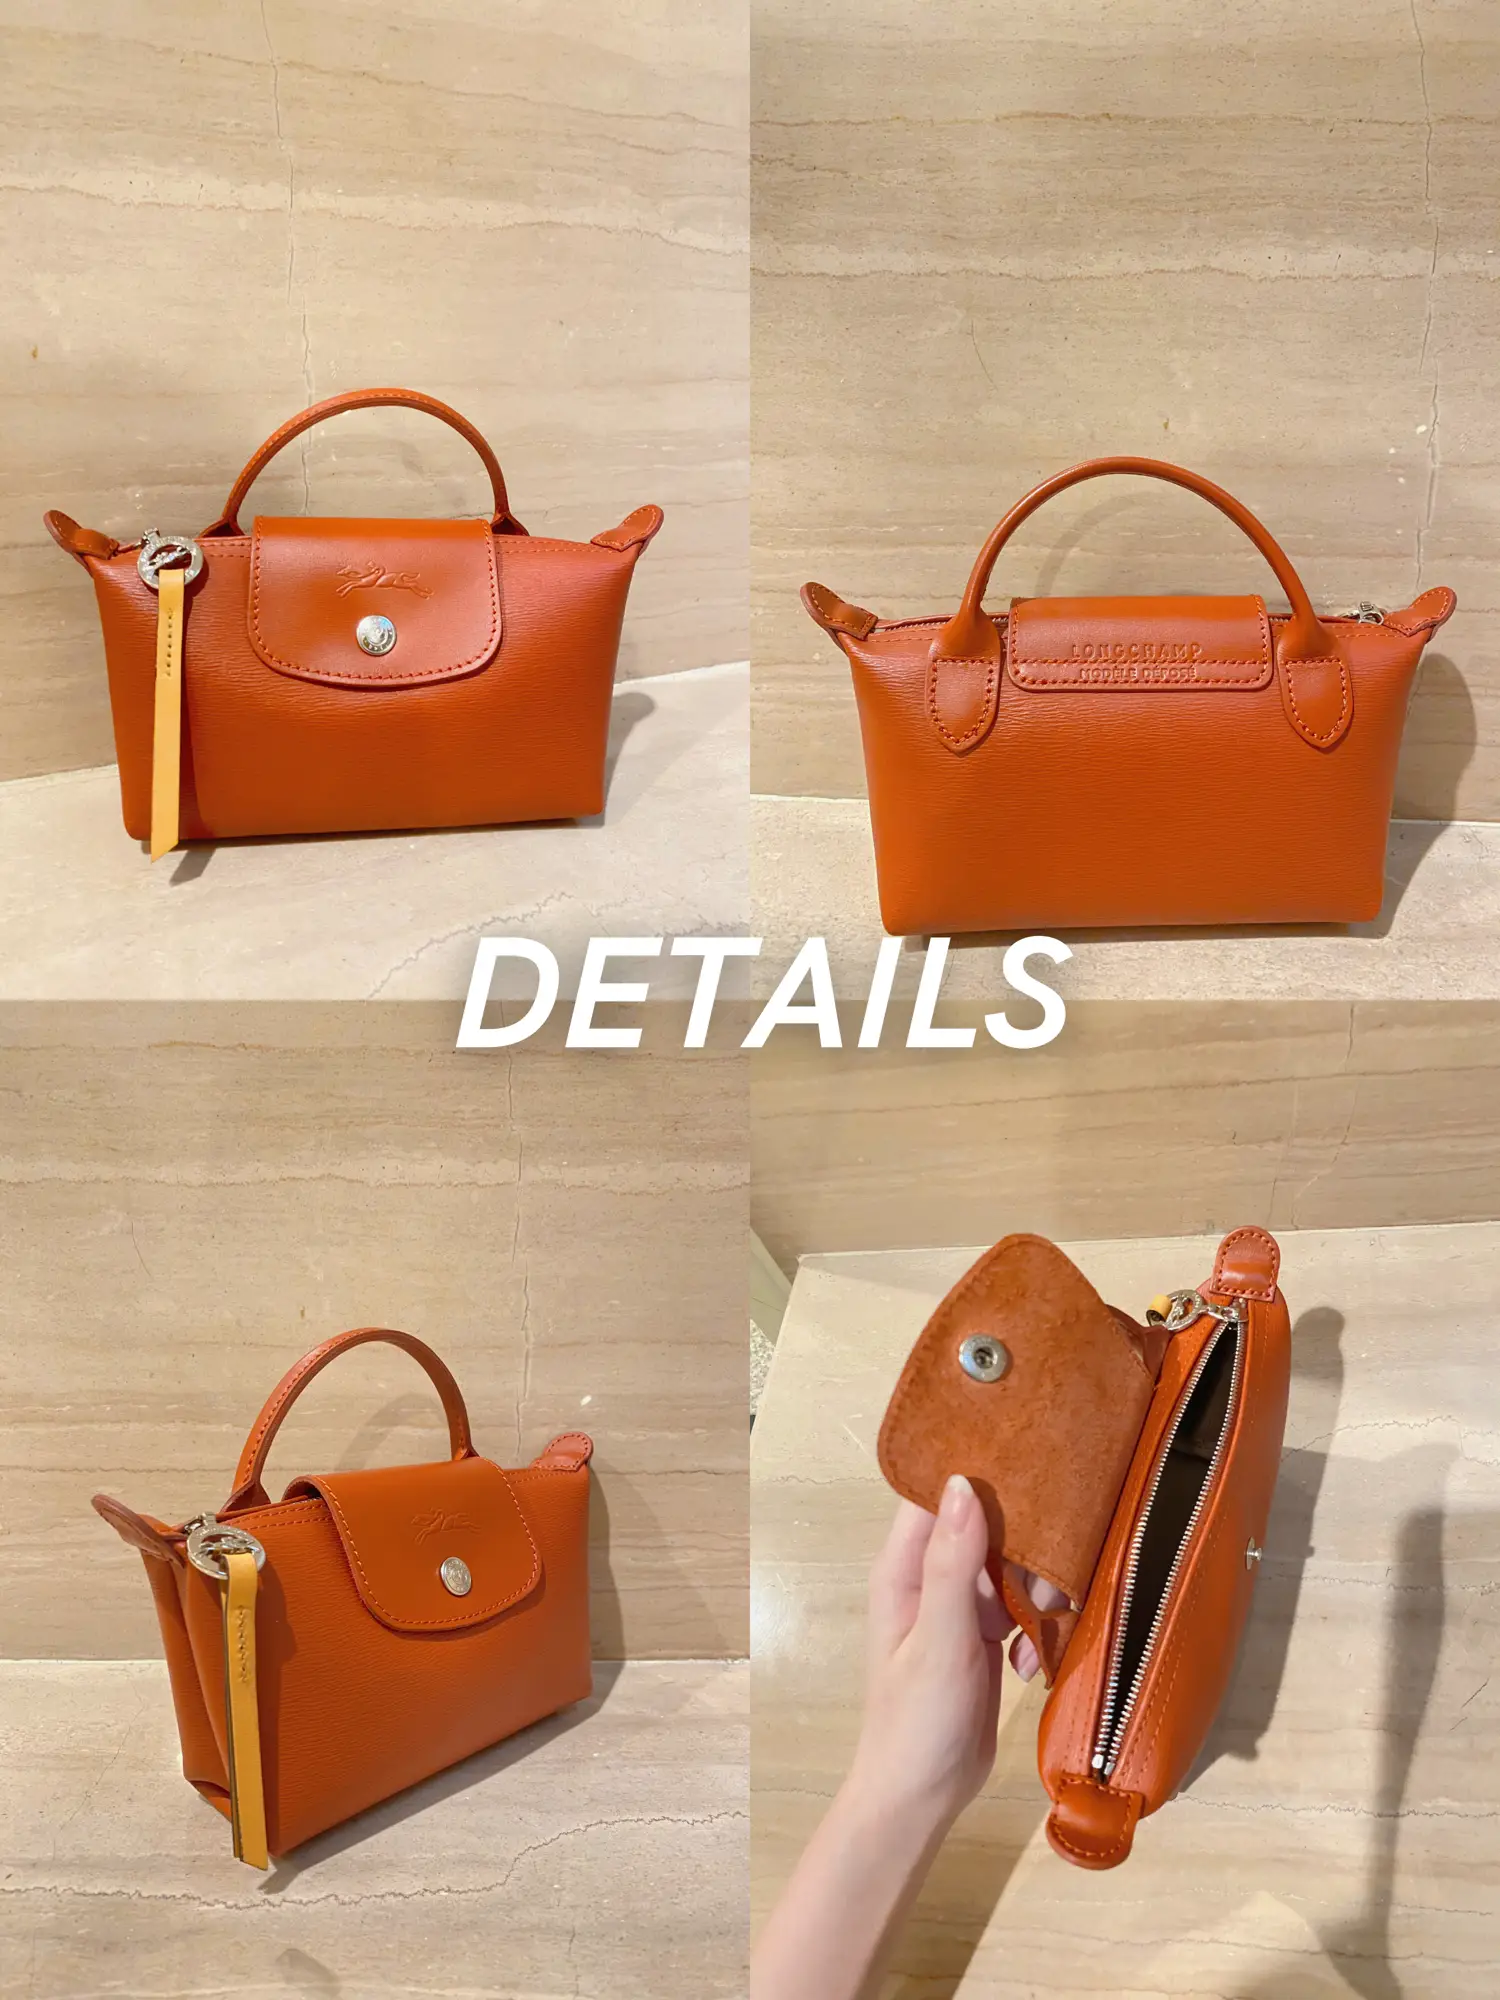 New Le Pliage Neo in ORANGE! Review, Longchamp Sale, and Favorite